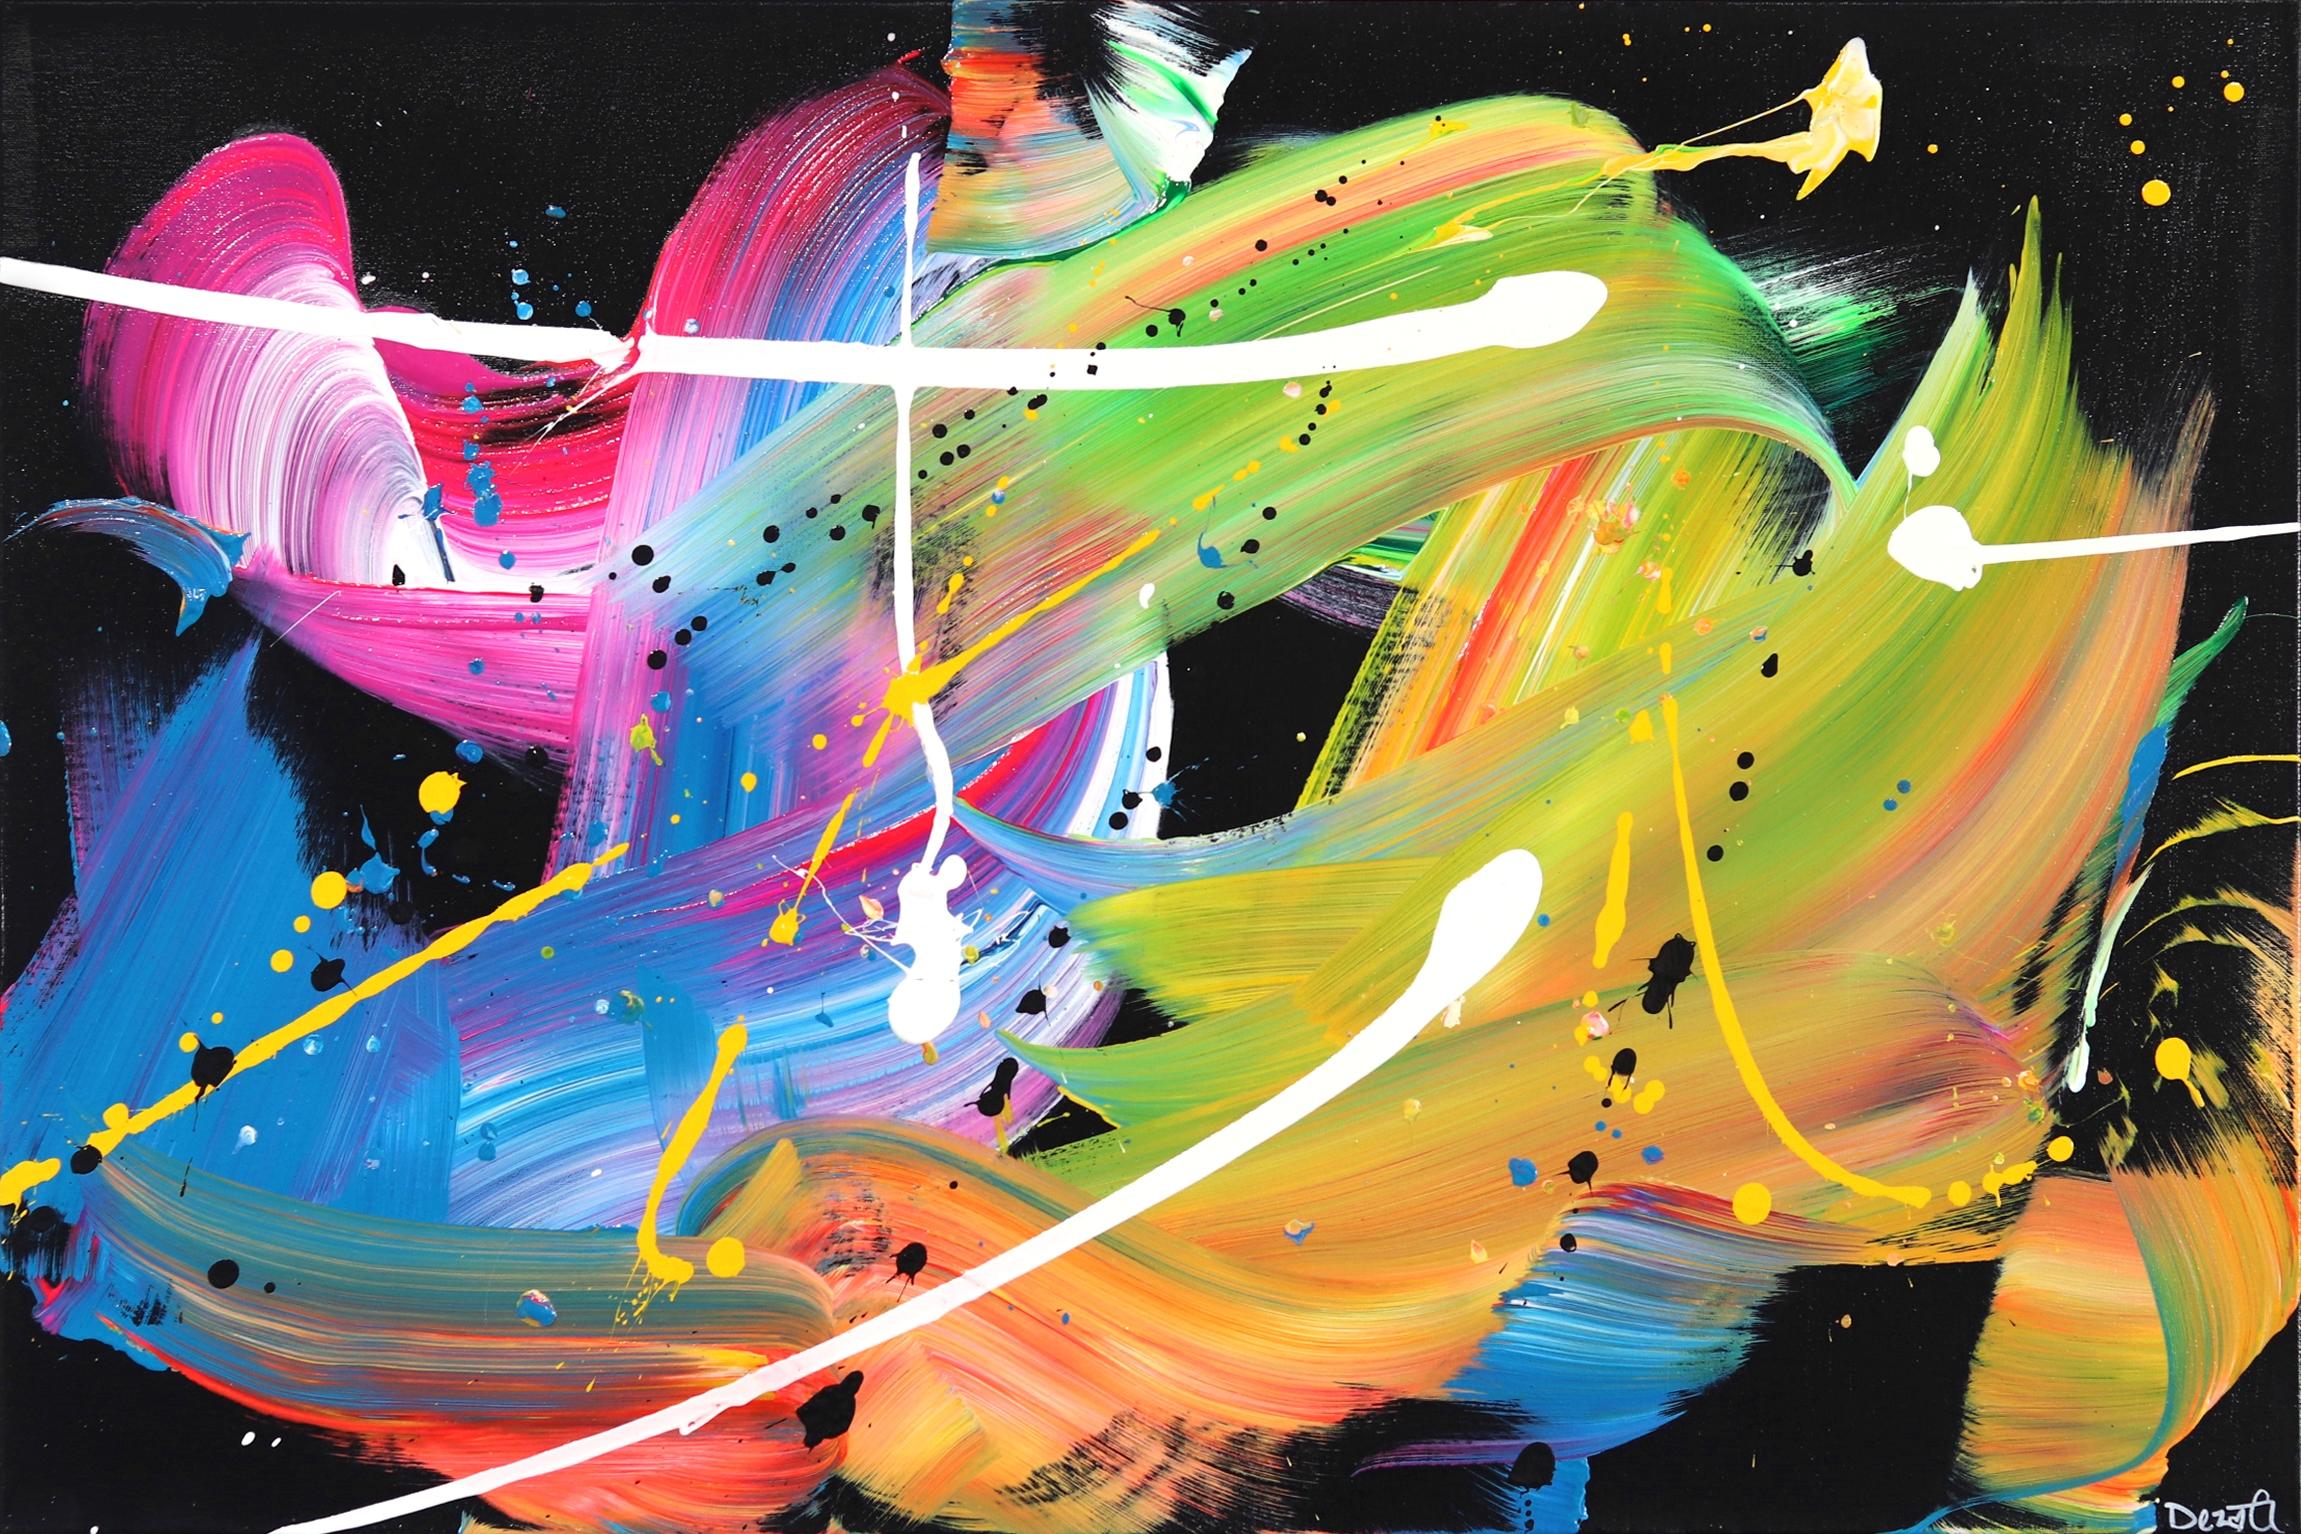 Black Rainbow - Vivid Abstract Expressionism Colorful Painting on Canvas - Art by Dez Gaskin